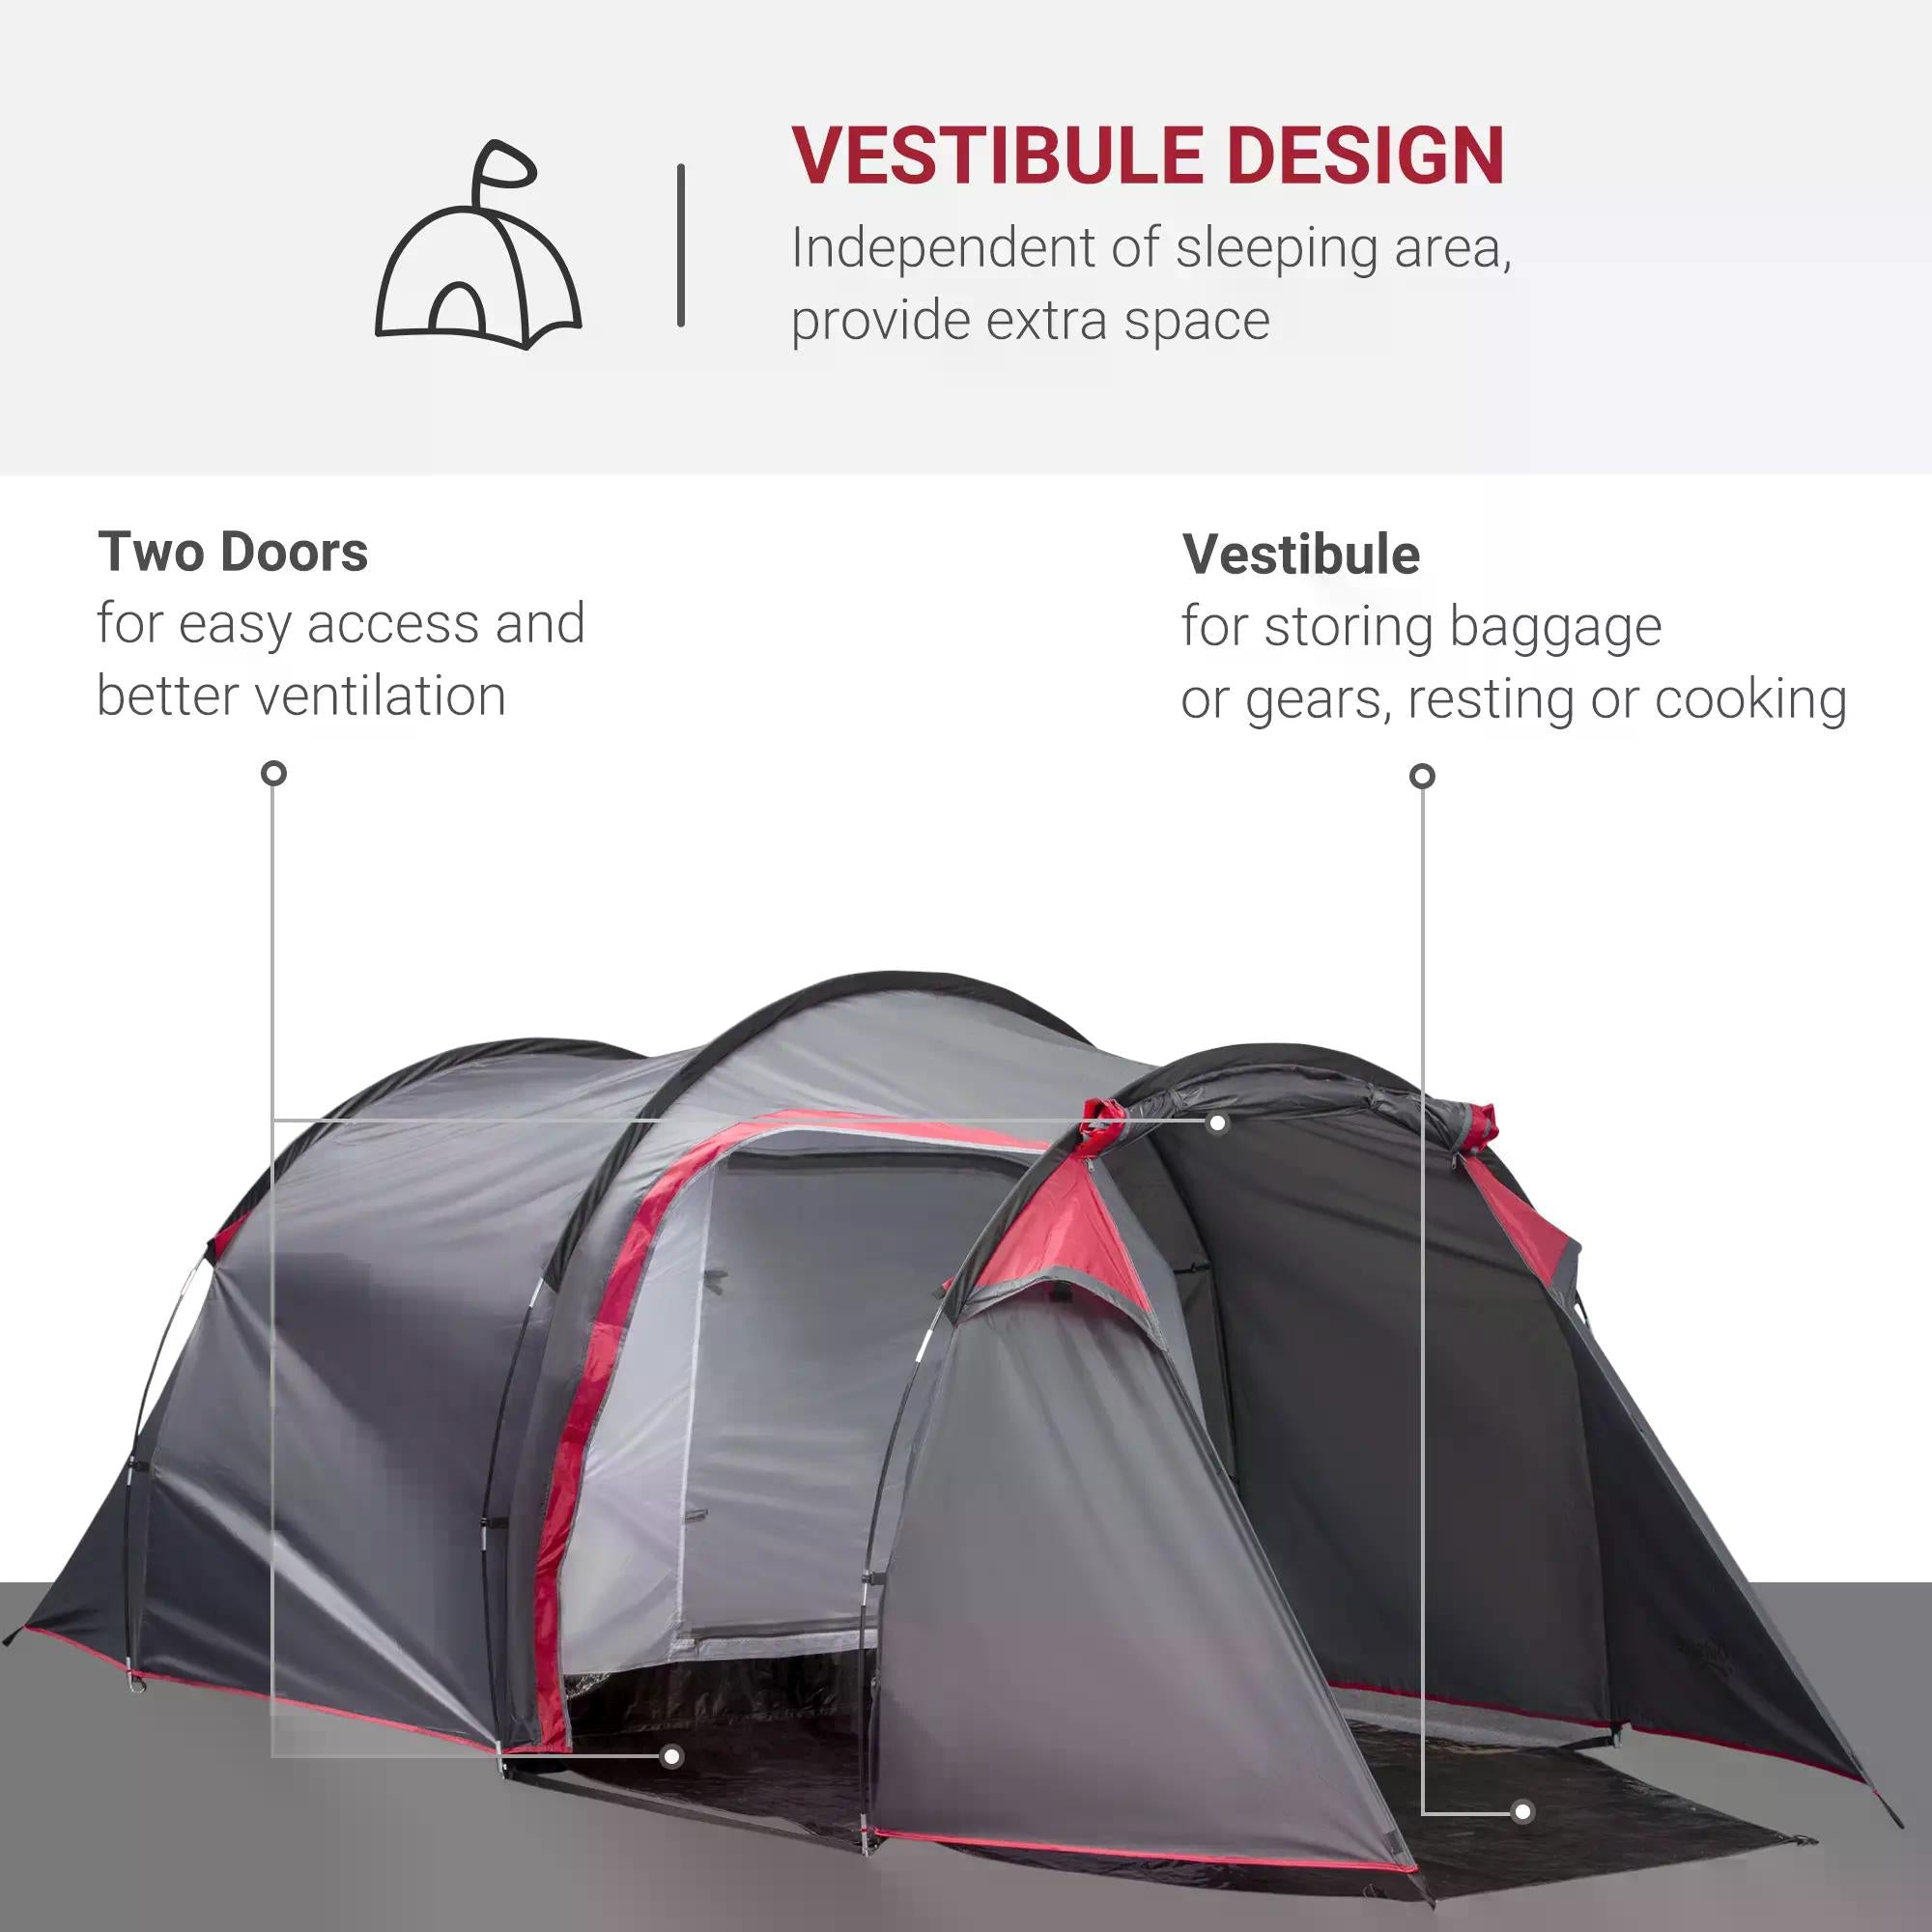 Camping Dome Tent 2 Room for 3-4 Person with Weatherproof Screen Room Vestibule Backpacking Tent Lightweight for Fishing & Hiking Dark Grey-3